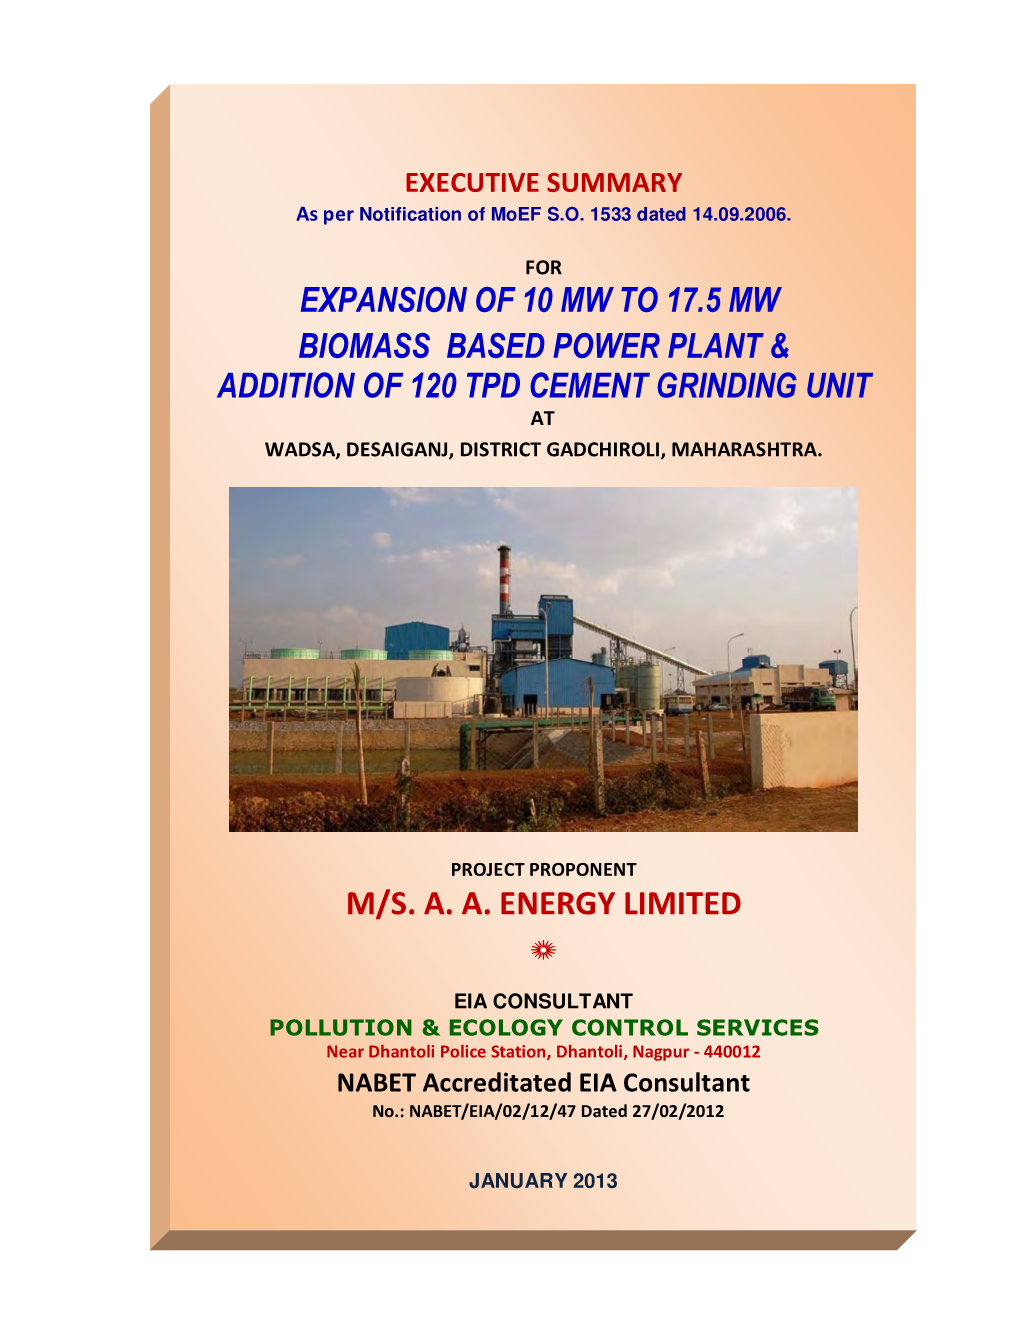 Expansion of 10 Mw to 17.5 Mw Biomass Based Power Plant & Addition of 120 Tpd Cement Grinding Unit at Wadsa, Desaiganj, District Gadchiroli, Maharashtra